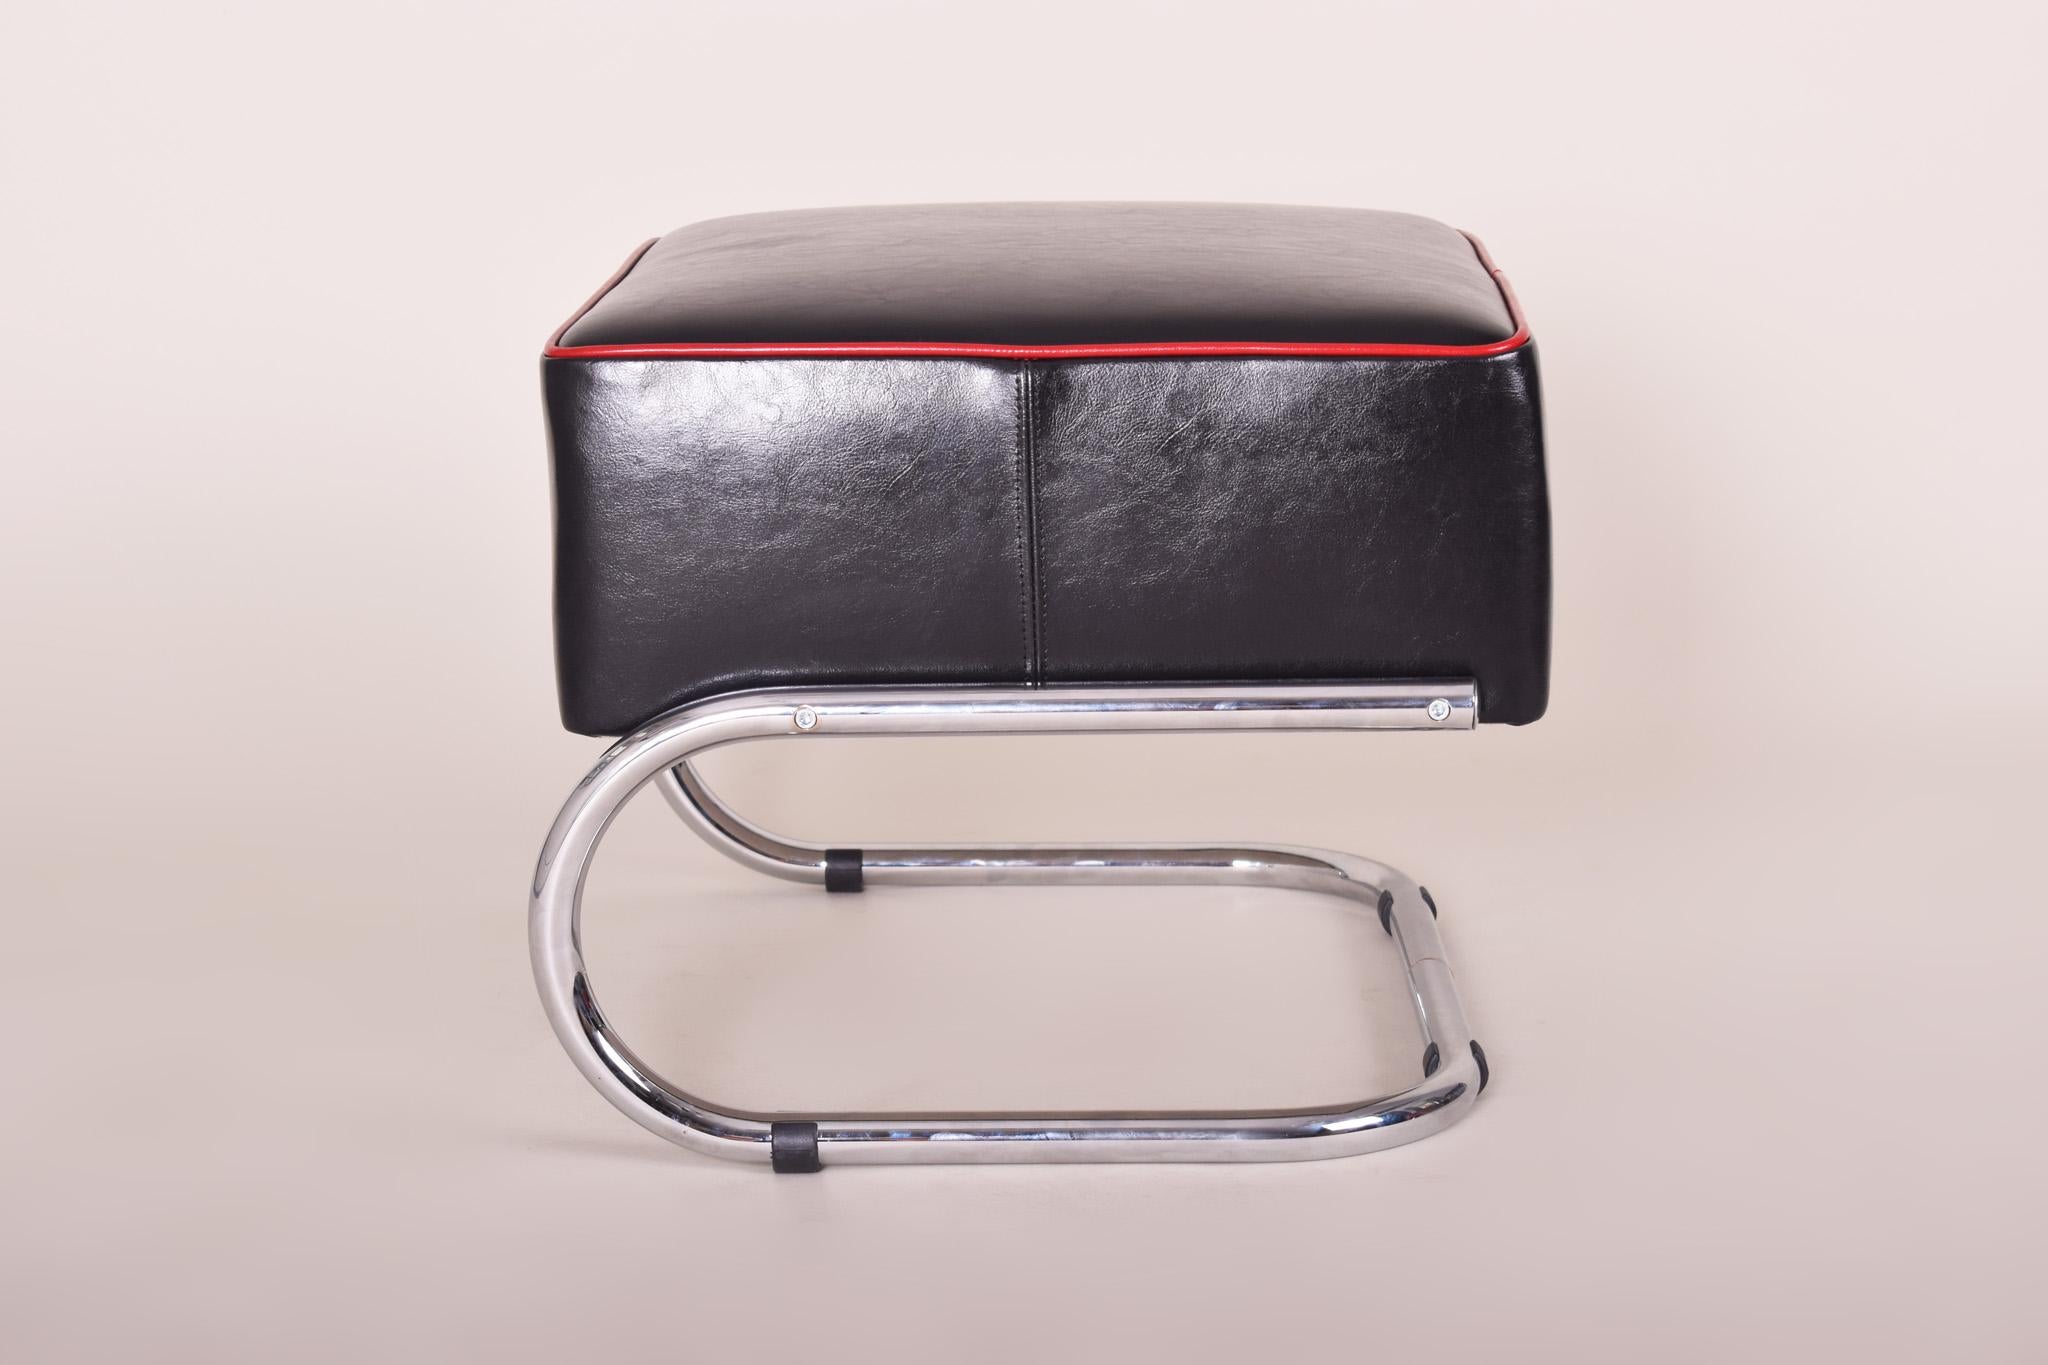 Pair of Modernist Tubular Steel Stools, Black and Red Leather, Chrome, 1930-1939 In Good Condition For Sale In Horomerice, CZ